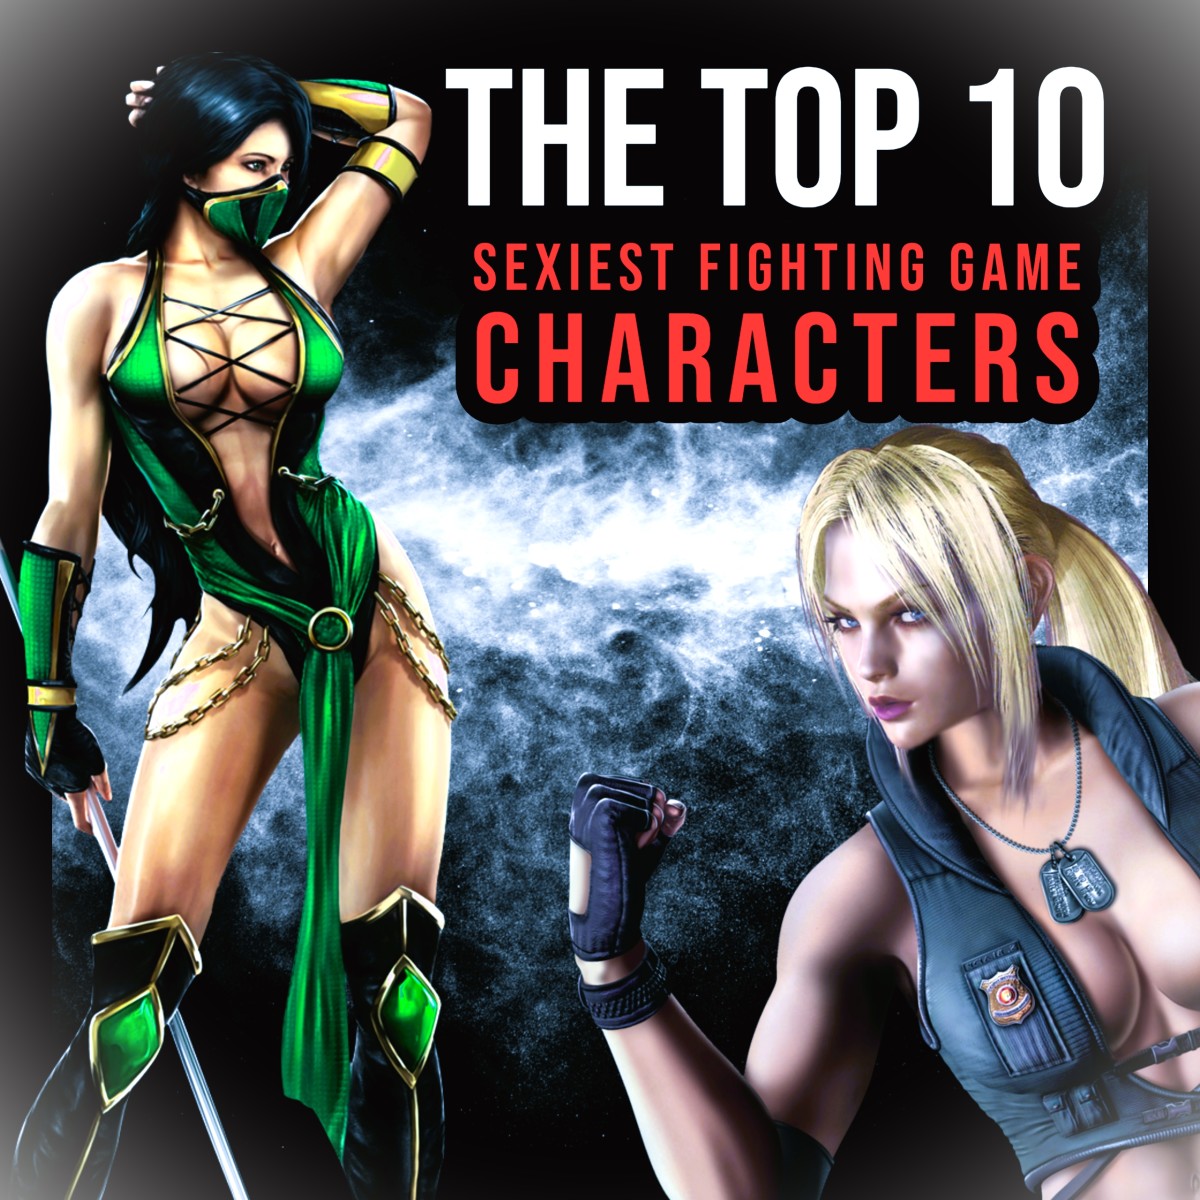 The Top 10 Sexiest Fighting Game Characters